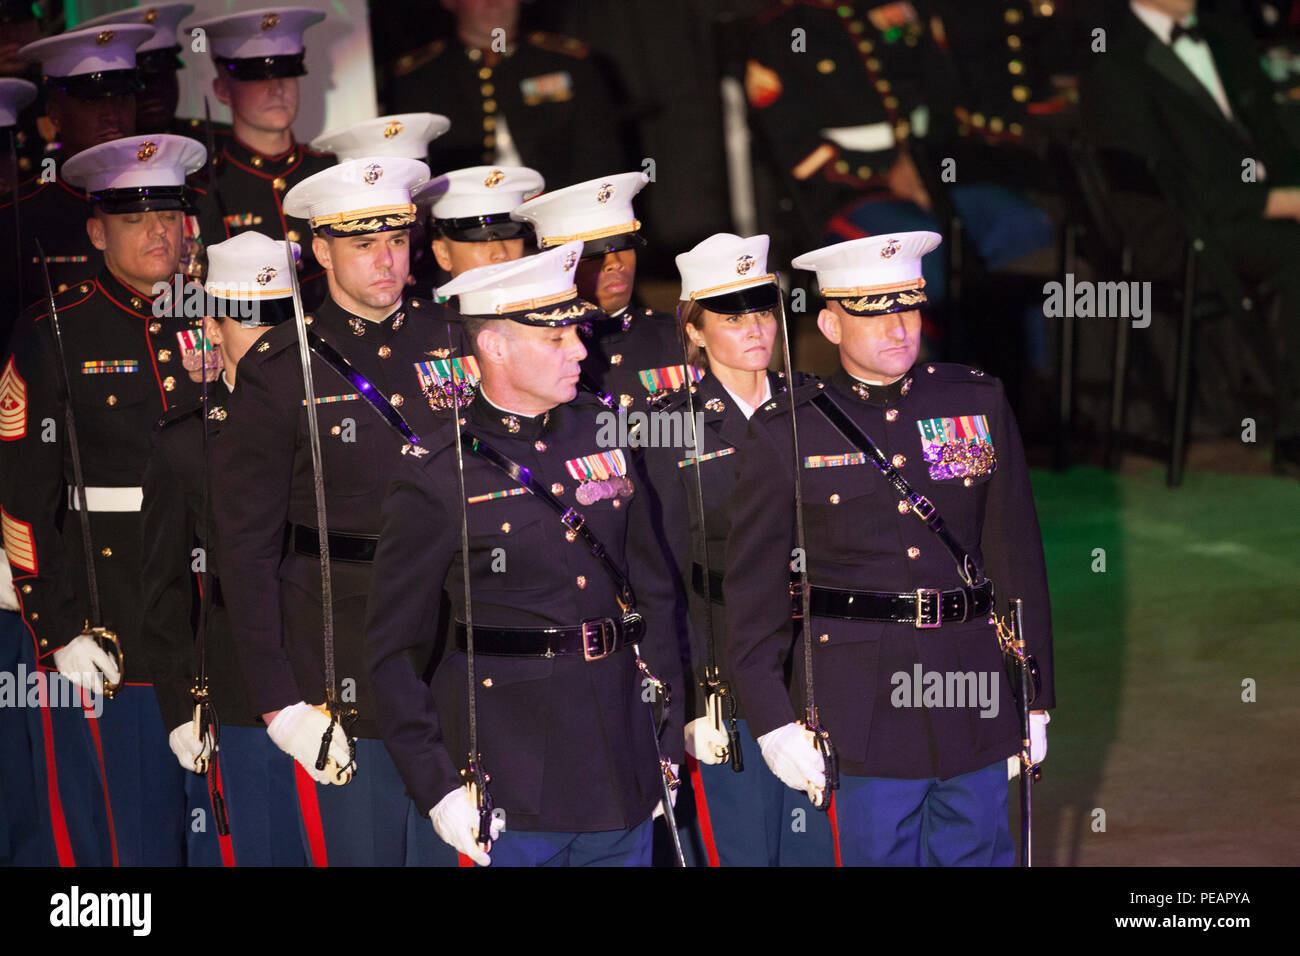 U.S. Marines with Marine Forces Reserve, march their positions during the celebration of the 240th Marine Corps Birthday Ball at Mardi Gras World, New Orleans, La., Nov. 21, 2015. This year’s celebration honors those past, present, and future Marines throughout history and marks the 240th Marine Corps Birthday since its founding on Nov. 10, 1775. (U.S. Marine Corps photo by Kimberly Aguirre/Released) Stock Photo